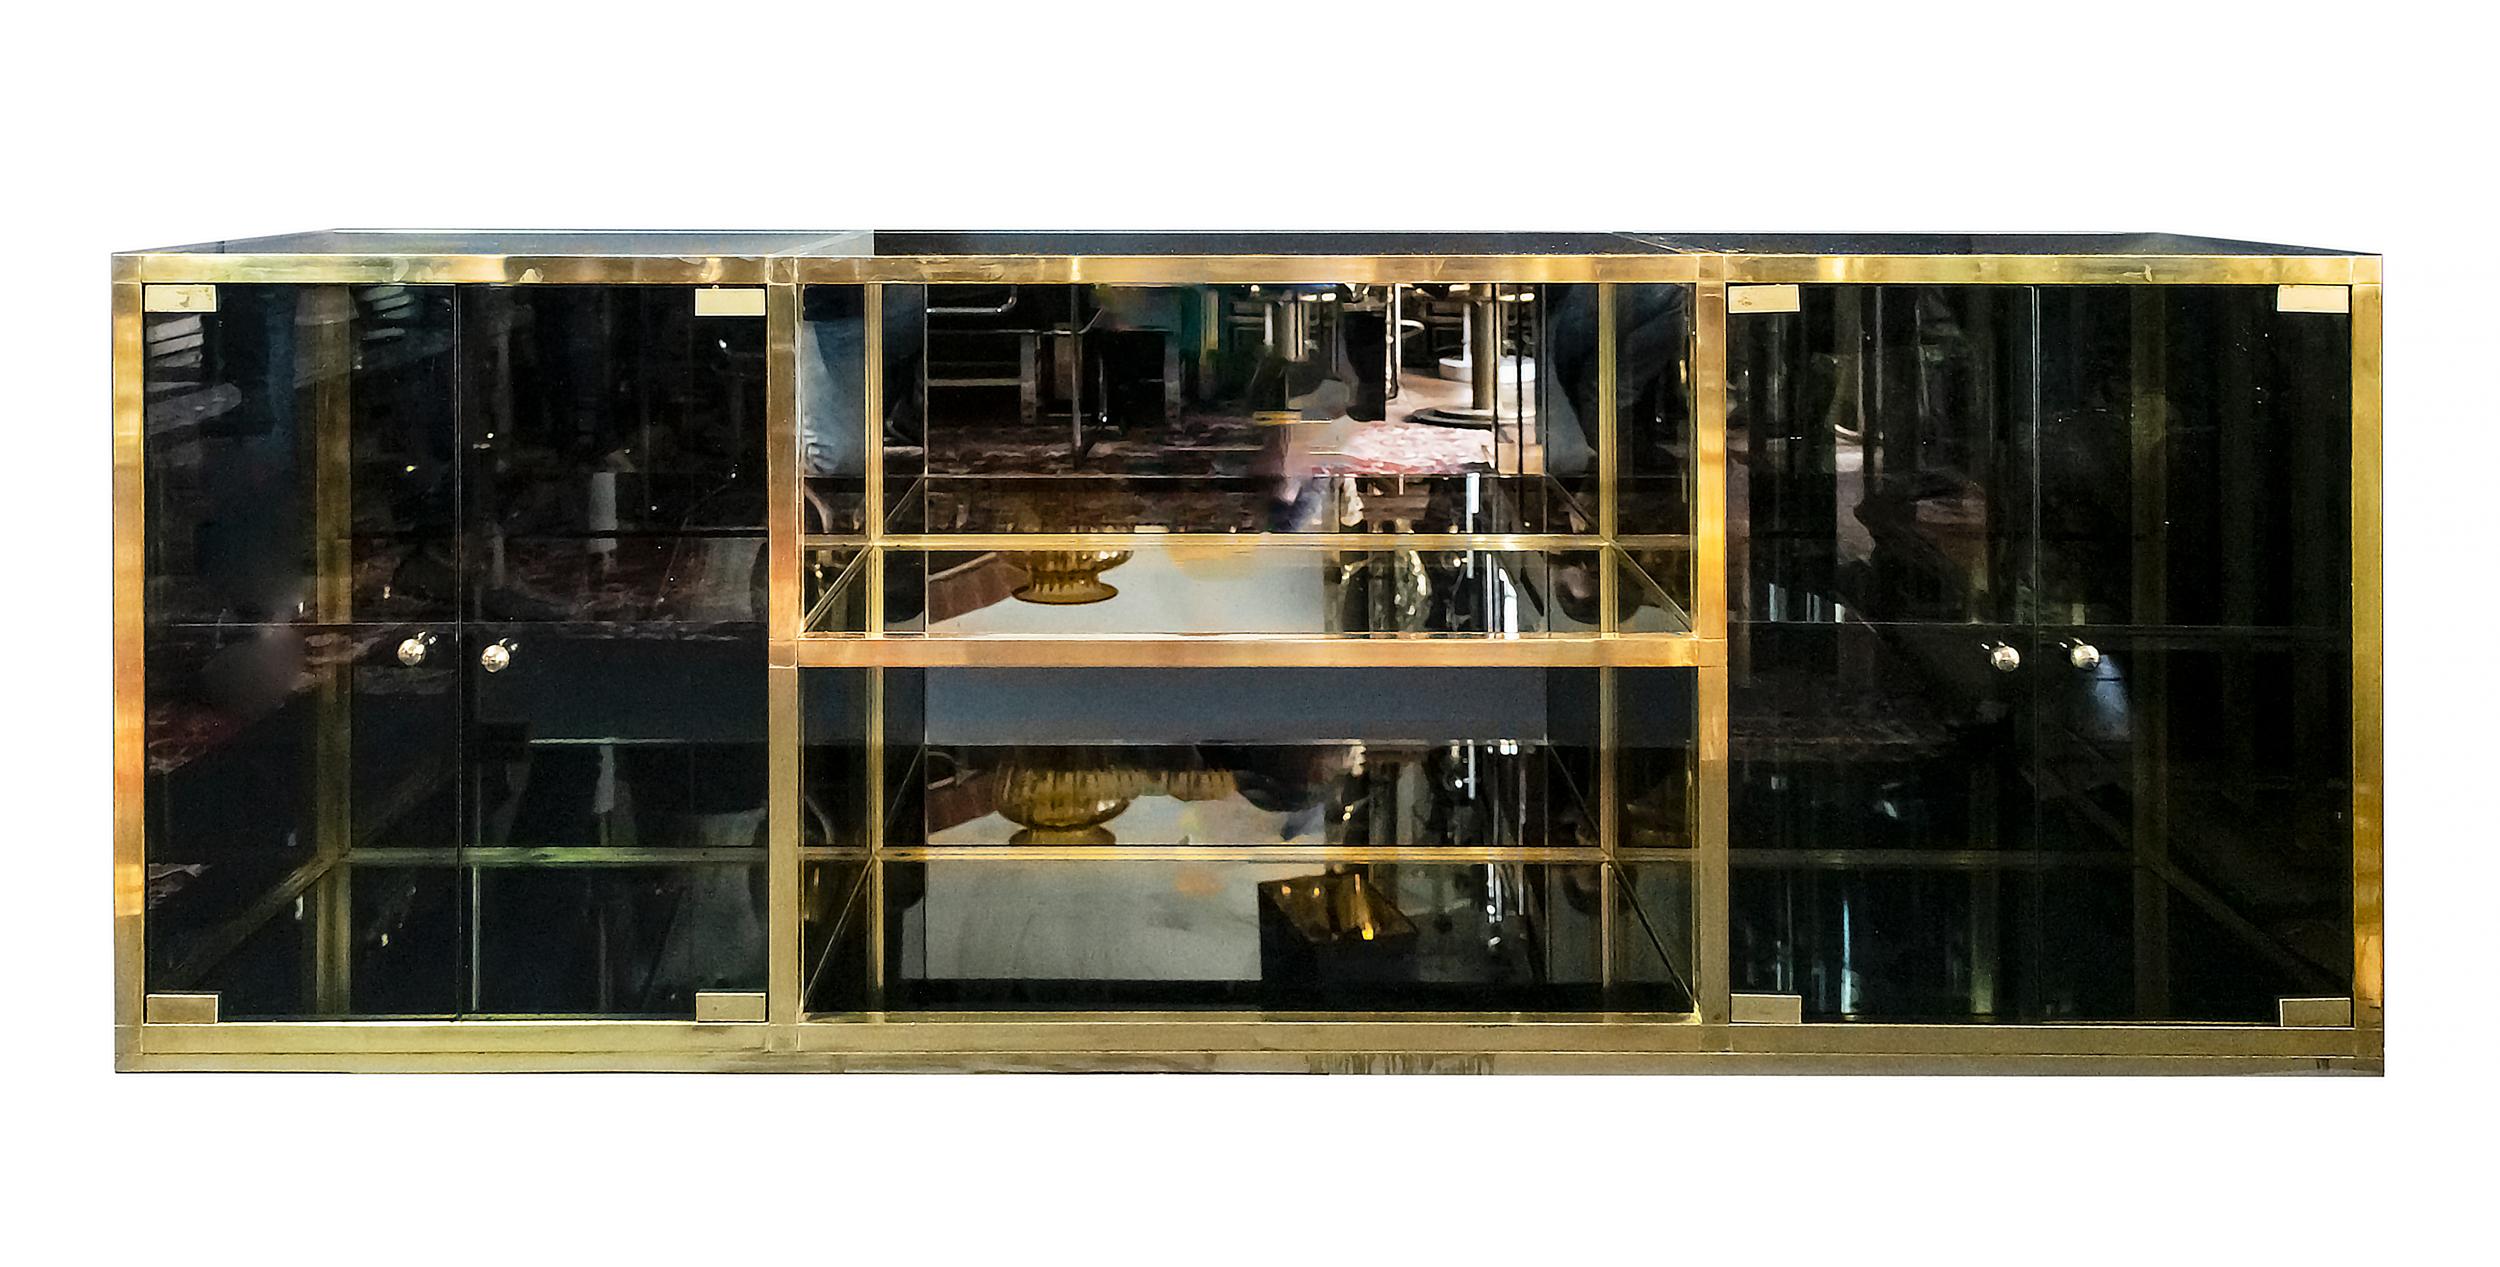 Italian mid-century brass and smoked glass sideboard in the style of Maison Jansen / Romeo Rega from 1970's.
The solid brass frame with smoked glass on sides, top, shelves and doors. 
The inside back is finished with mirror.
Overall very good